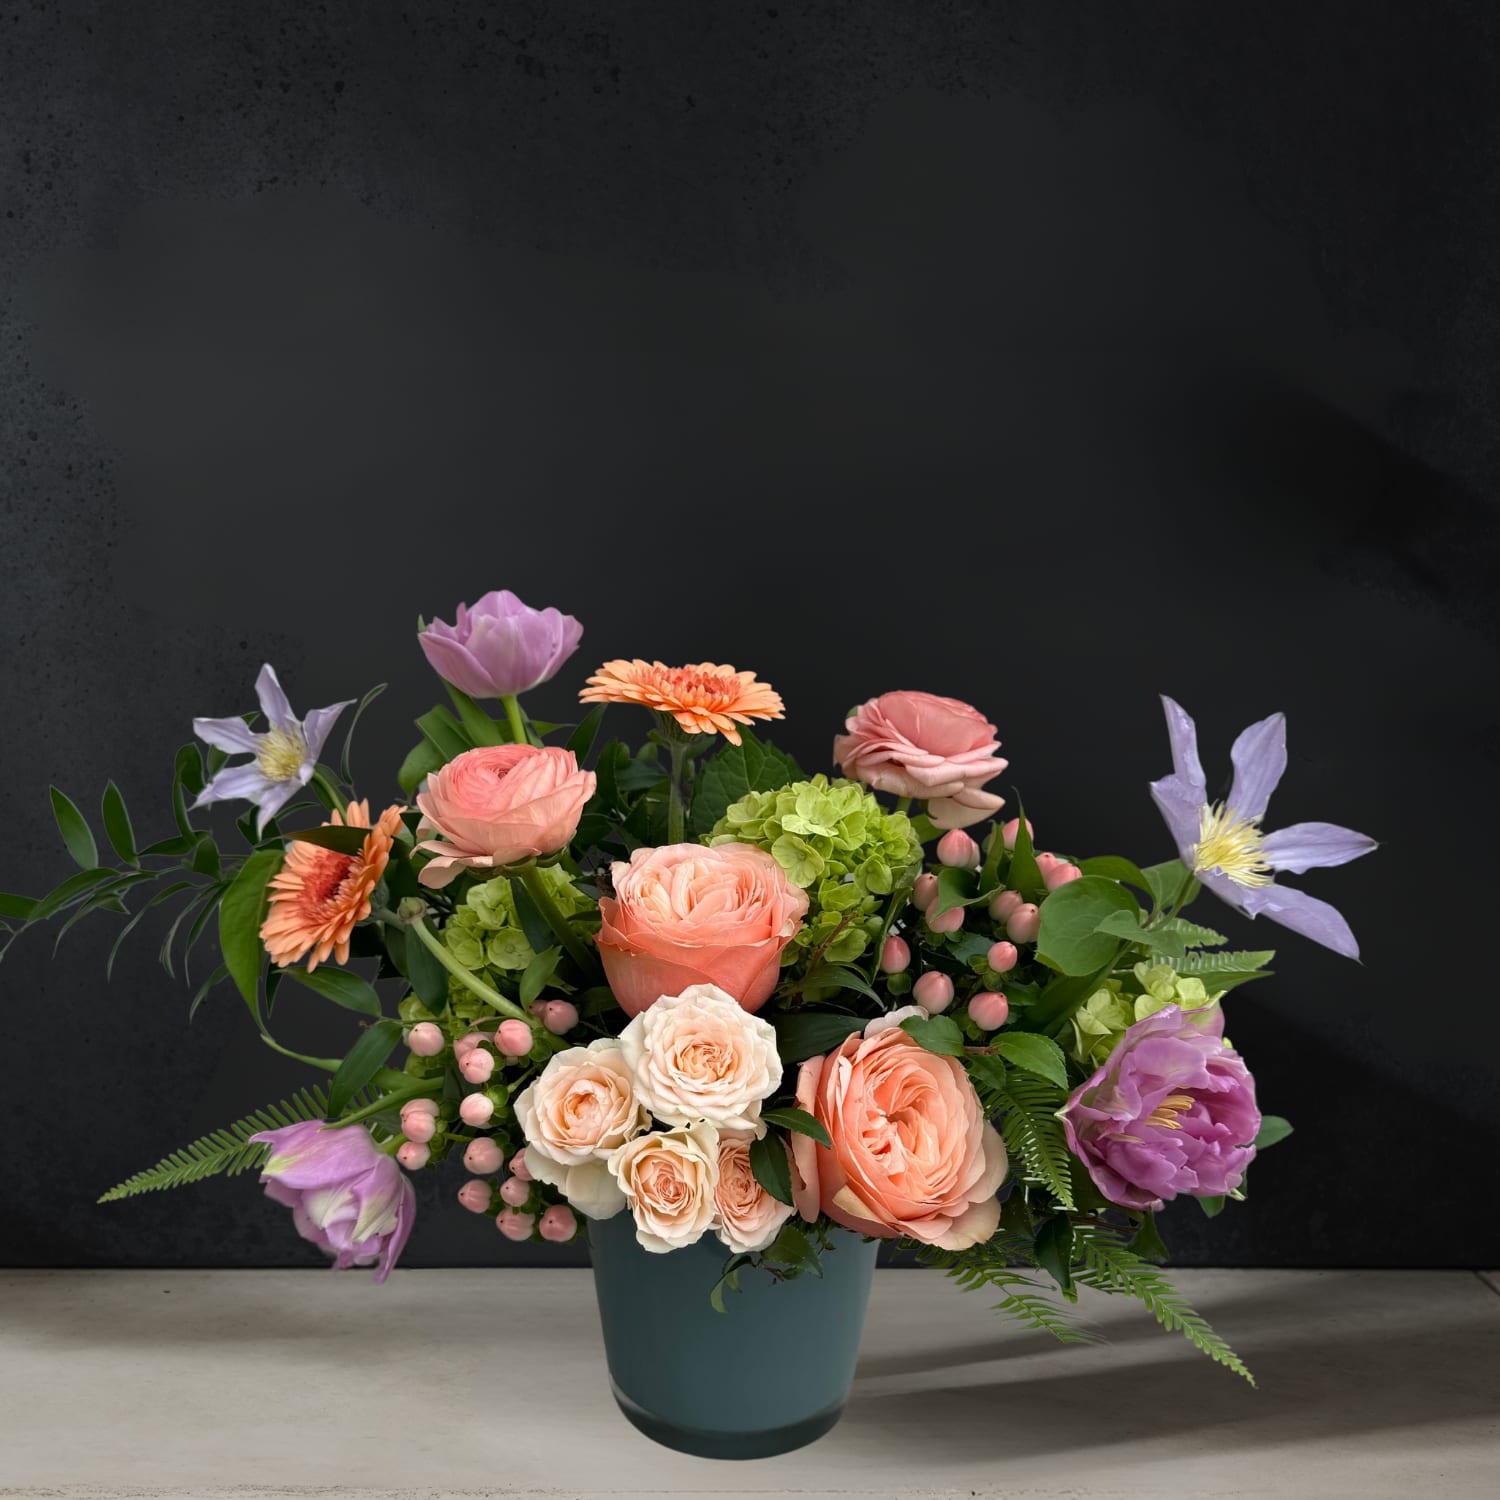 Coral Charm - A sleek gray glass vase cradles a one-sided arrangement of soft peach blooms, elegantly accented with lush green foliage and delicate lavender flowers